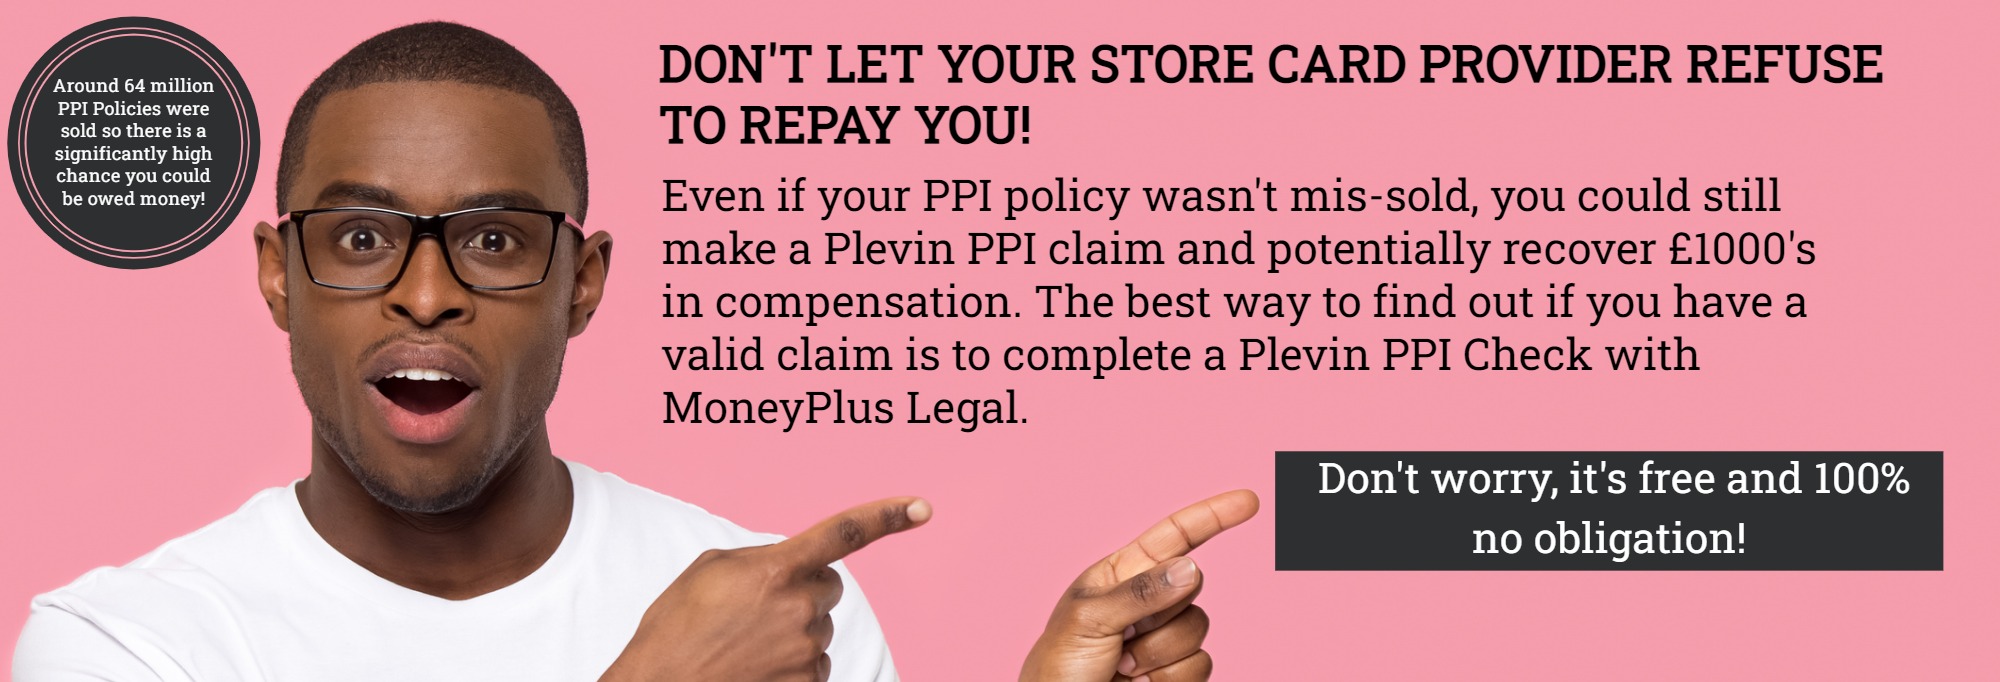 Mothercare Store card Plevin PPI Commission Claim